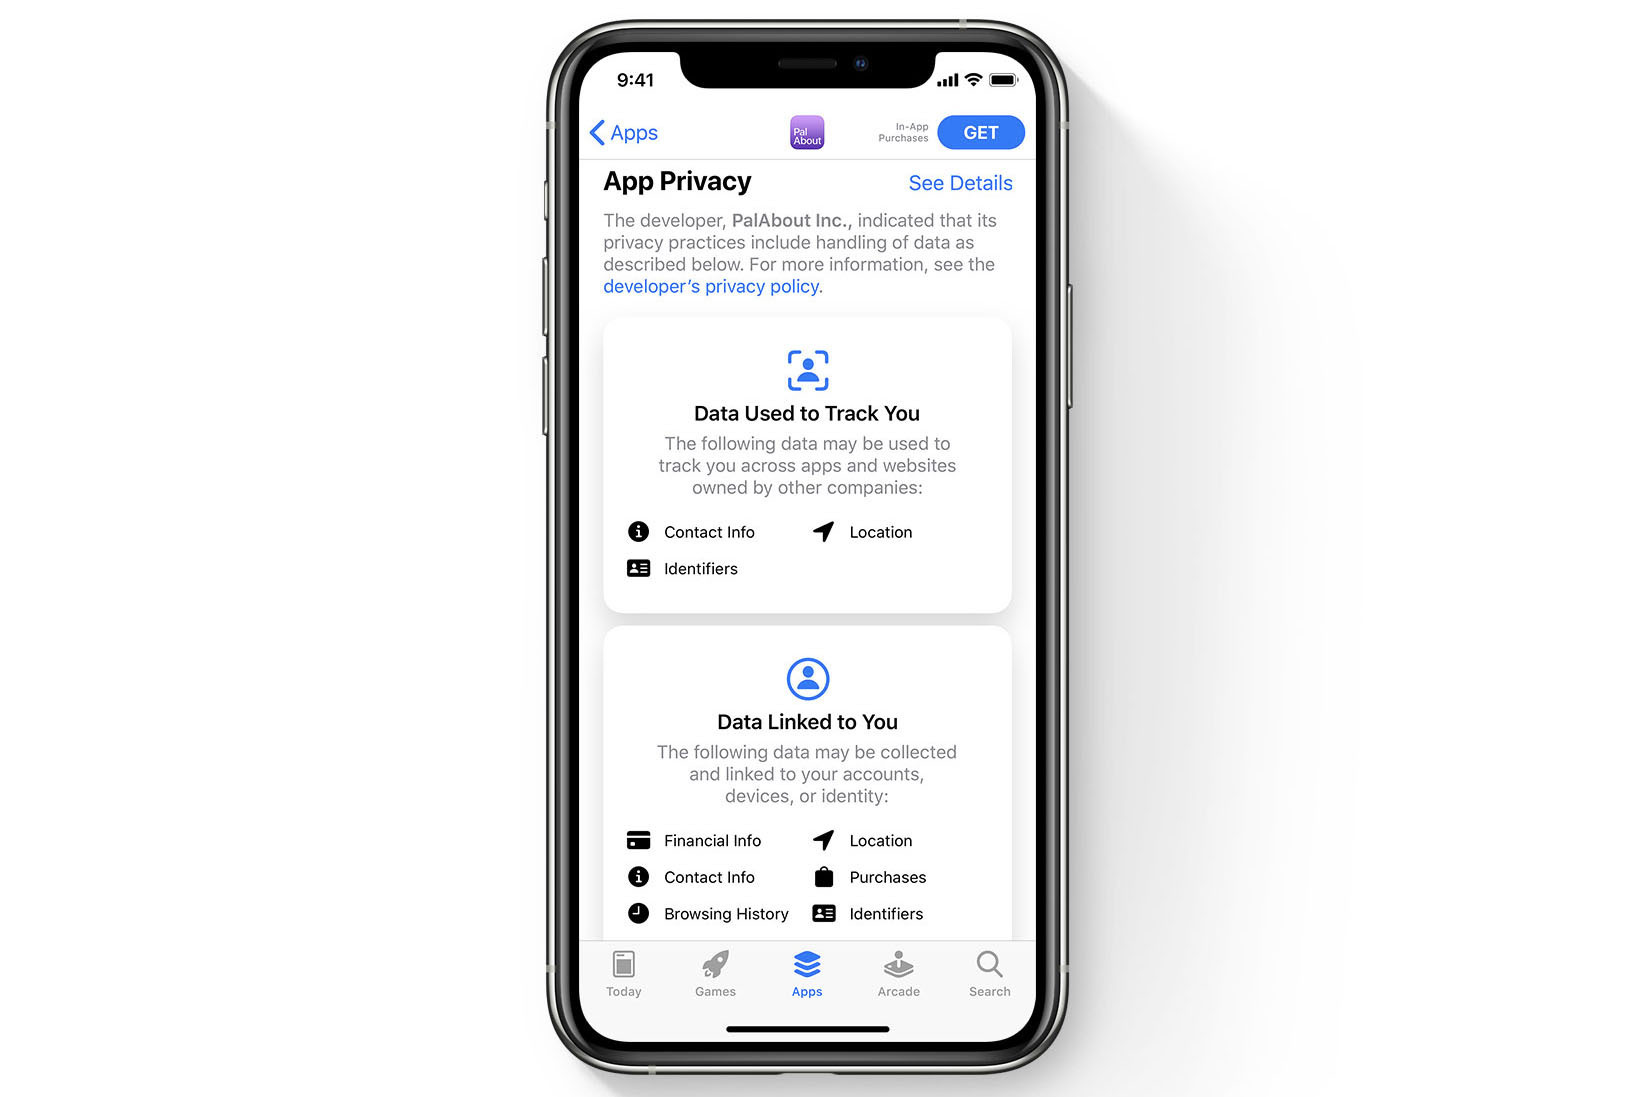 With the launch of iOS 14, it will be hard for Facebook Ads Manager to track and share ad performance data for e-commerce businesses.